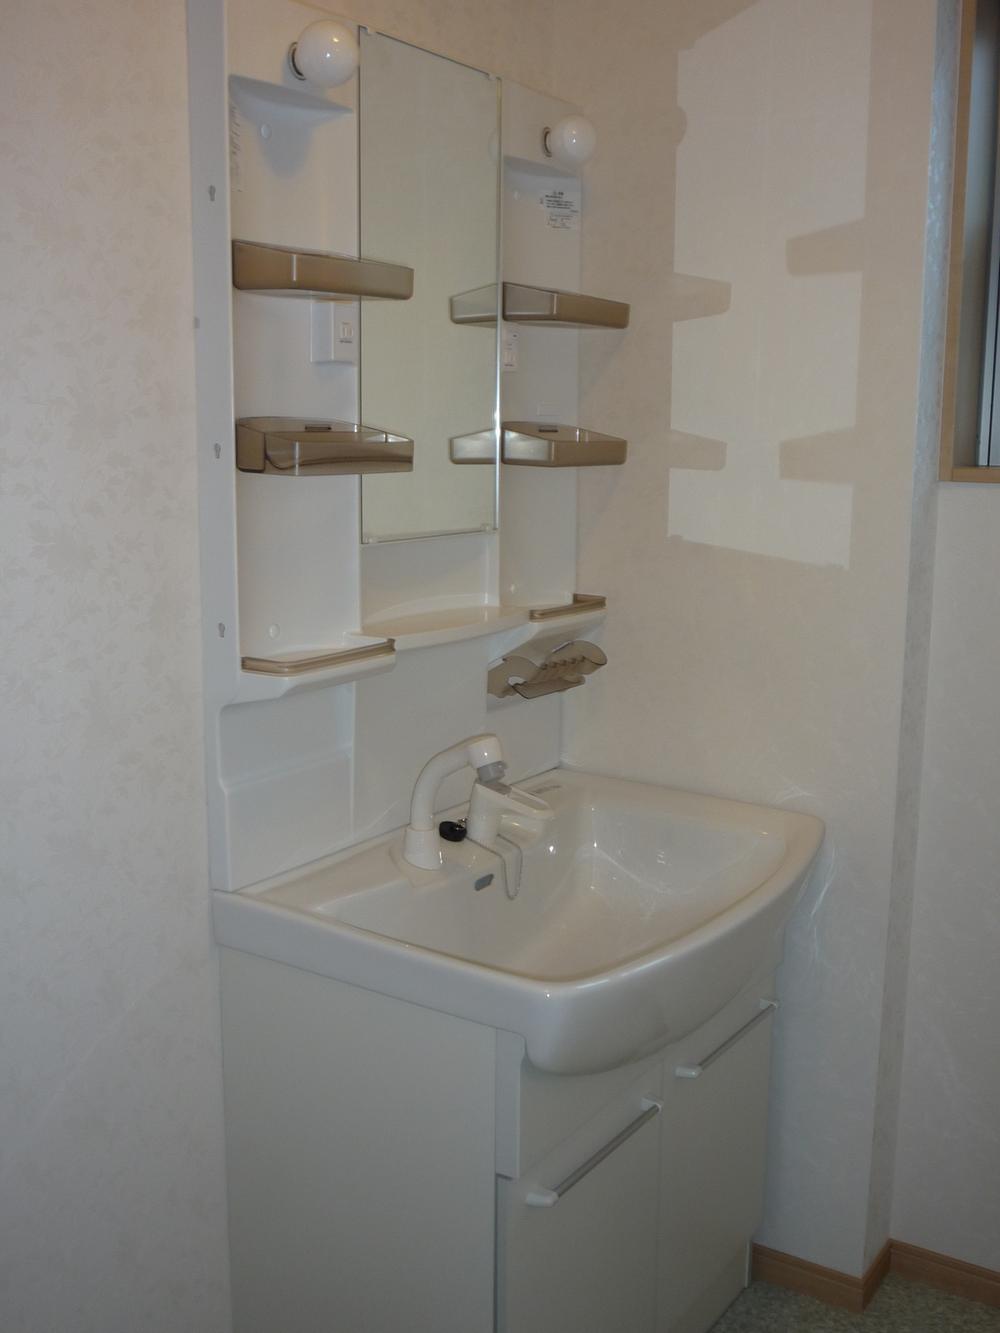 Same specifications photos (Other introspection). Wash basin with shampoo dresser